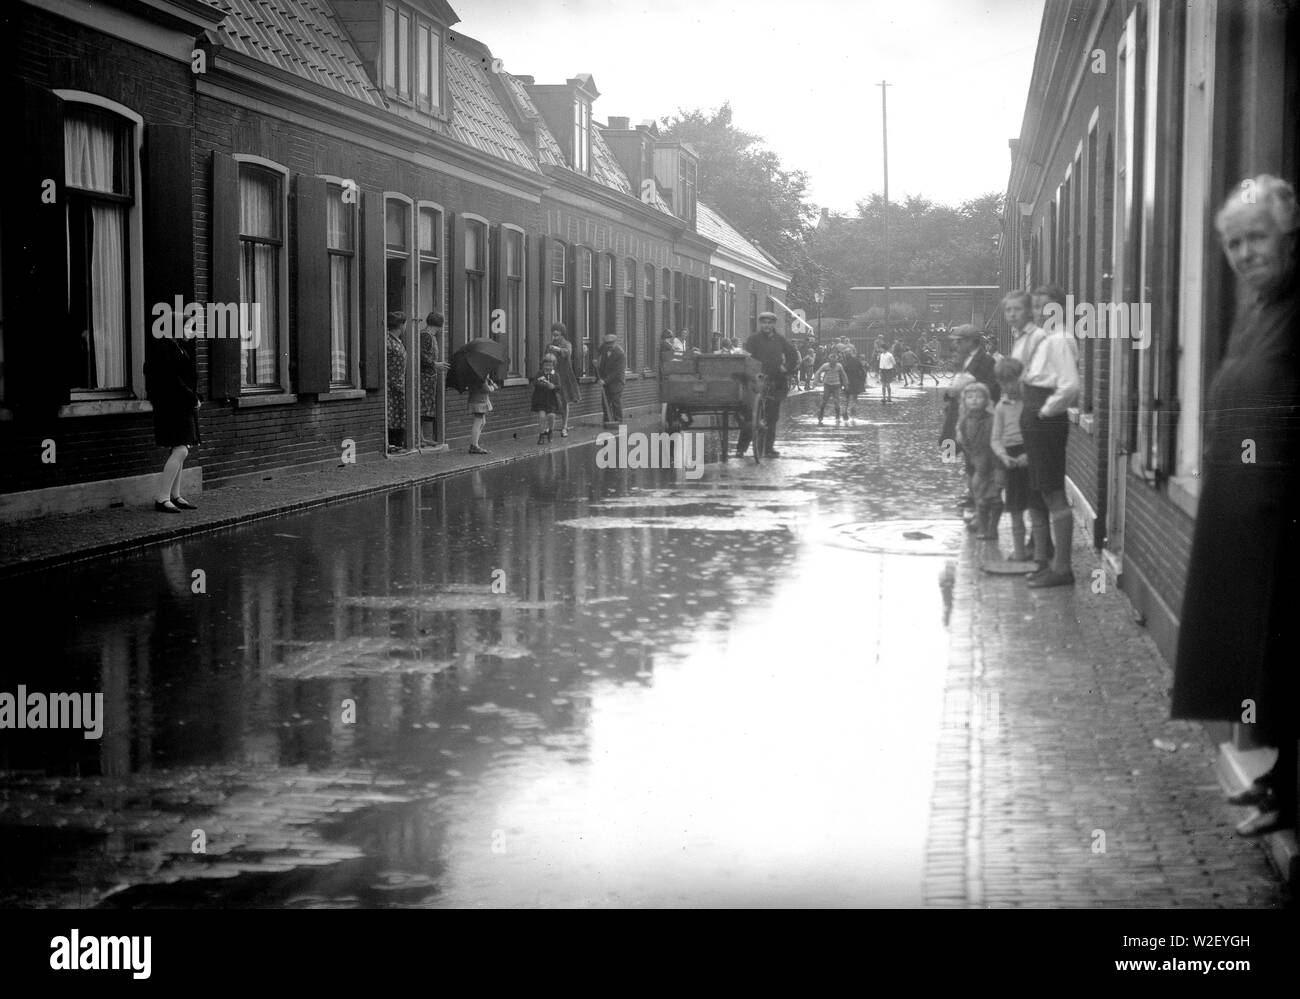 Netherlands history - street scene in a city in the Netherlands after a rain ca. 1930 Stock Photo